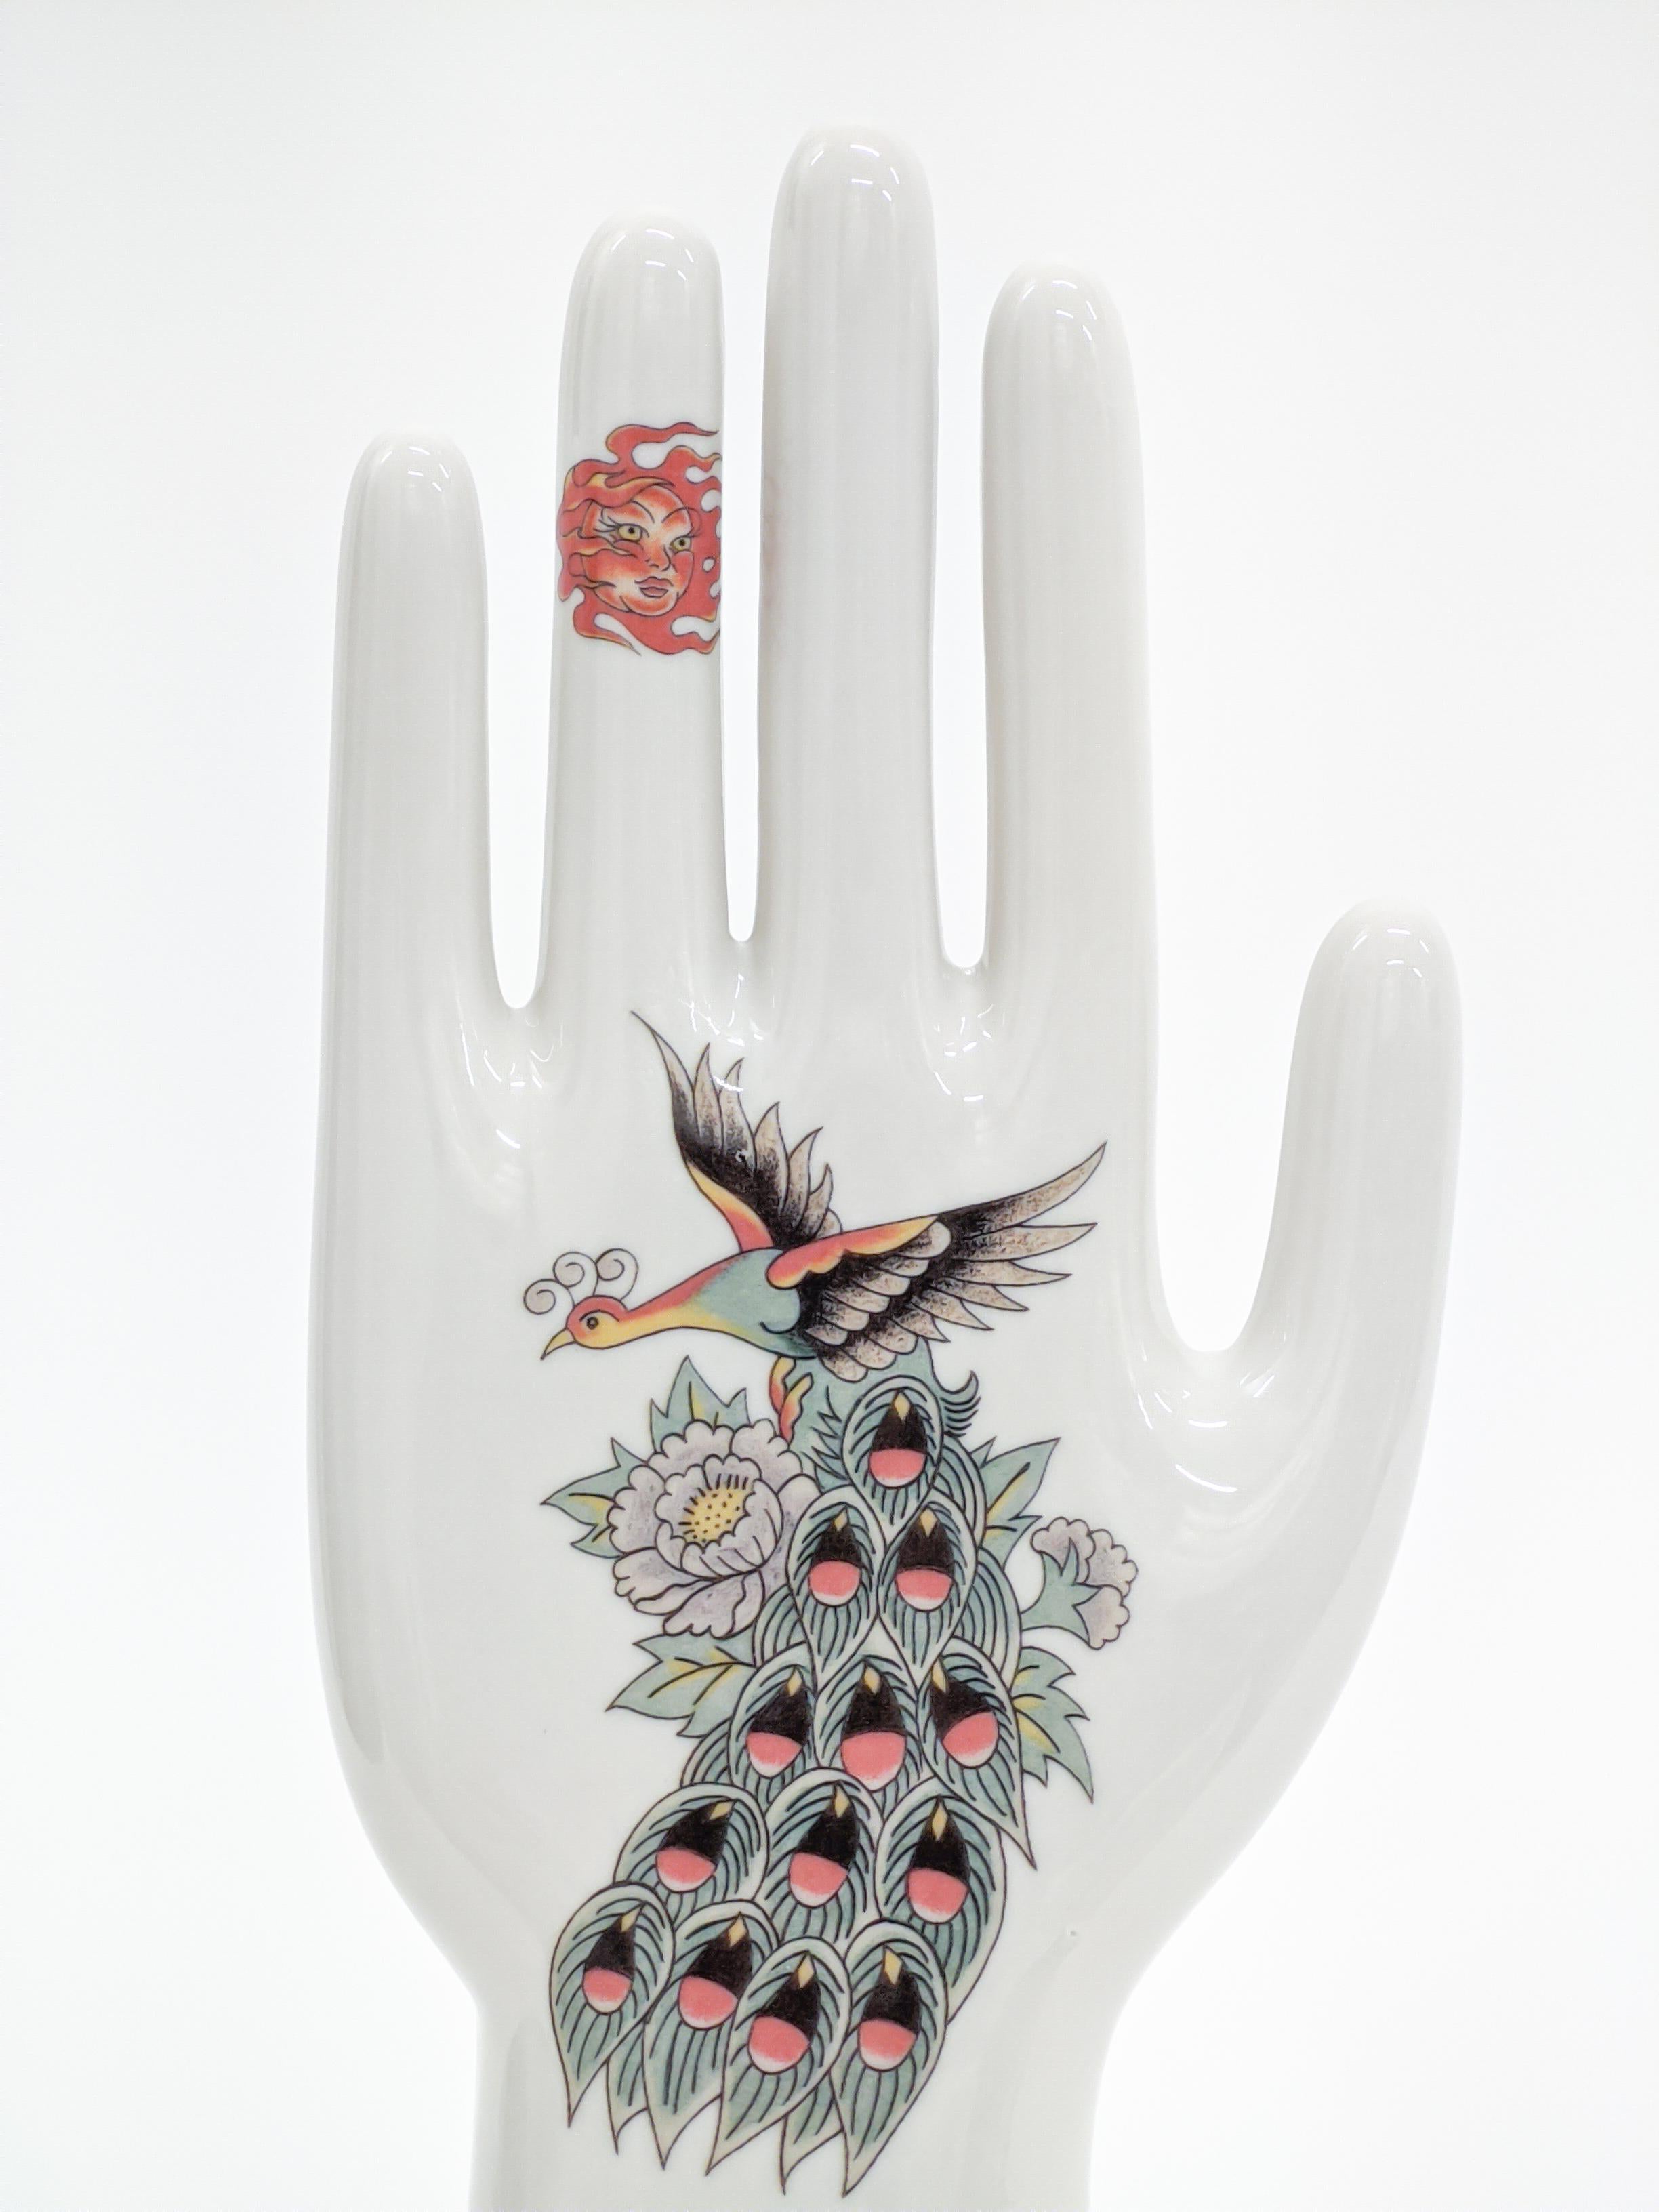 Italian Anatomica, Porcelain Hand with Old School Tattoo Decoration by Vito Nesta For Sale